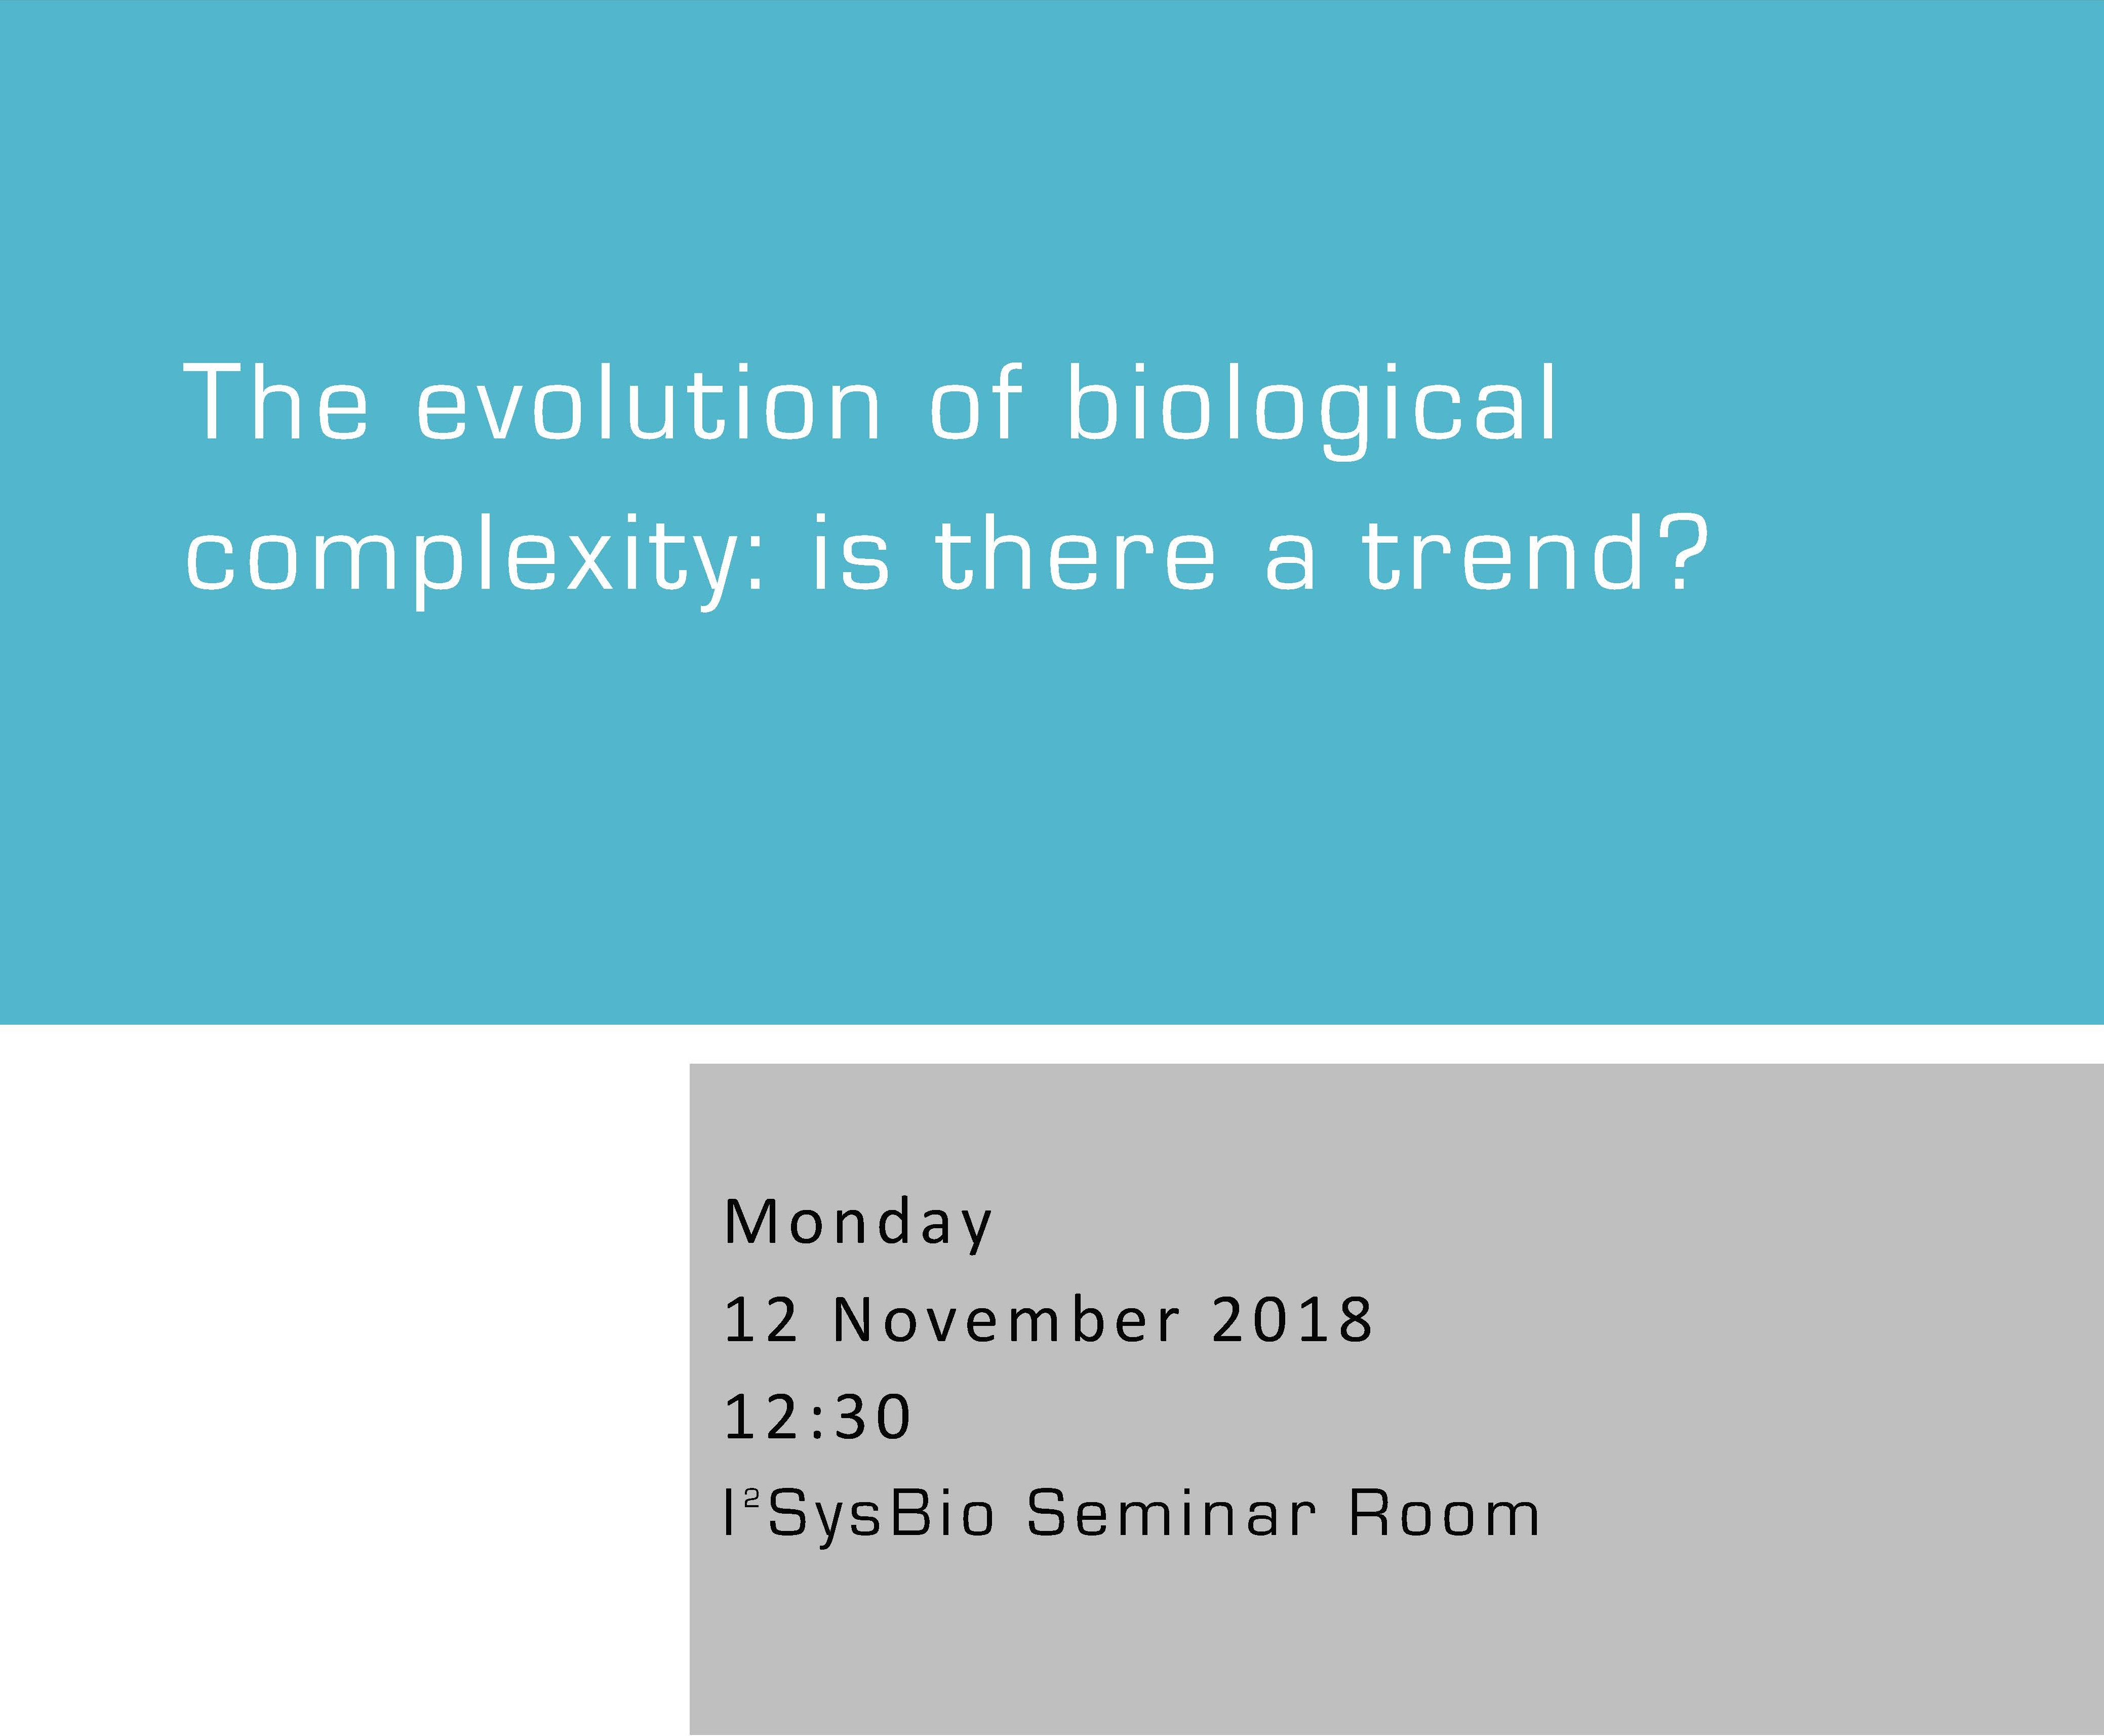 The evolution of biological complexity: is there a trend?